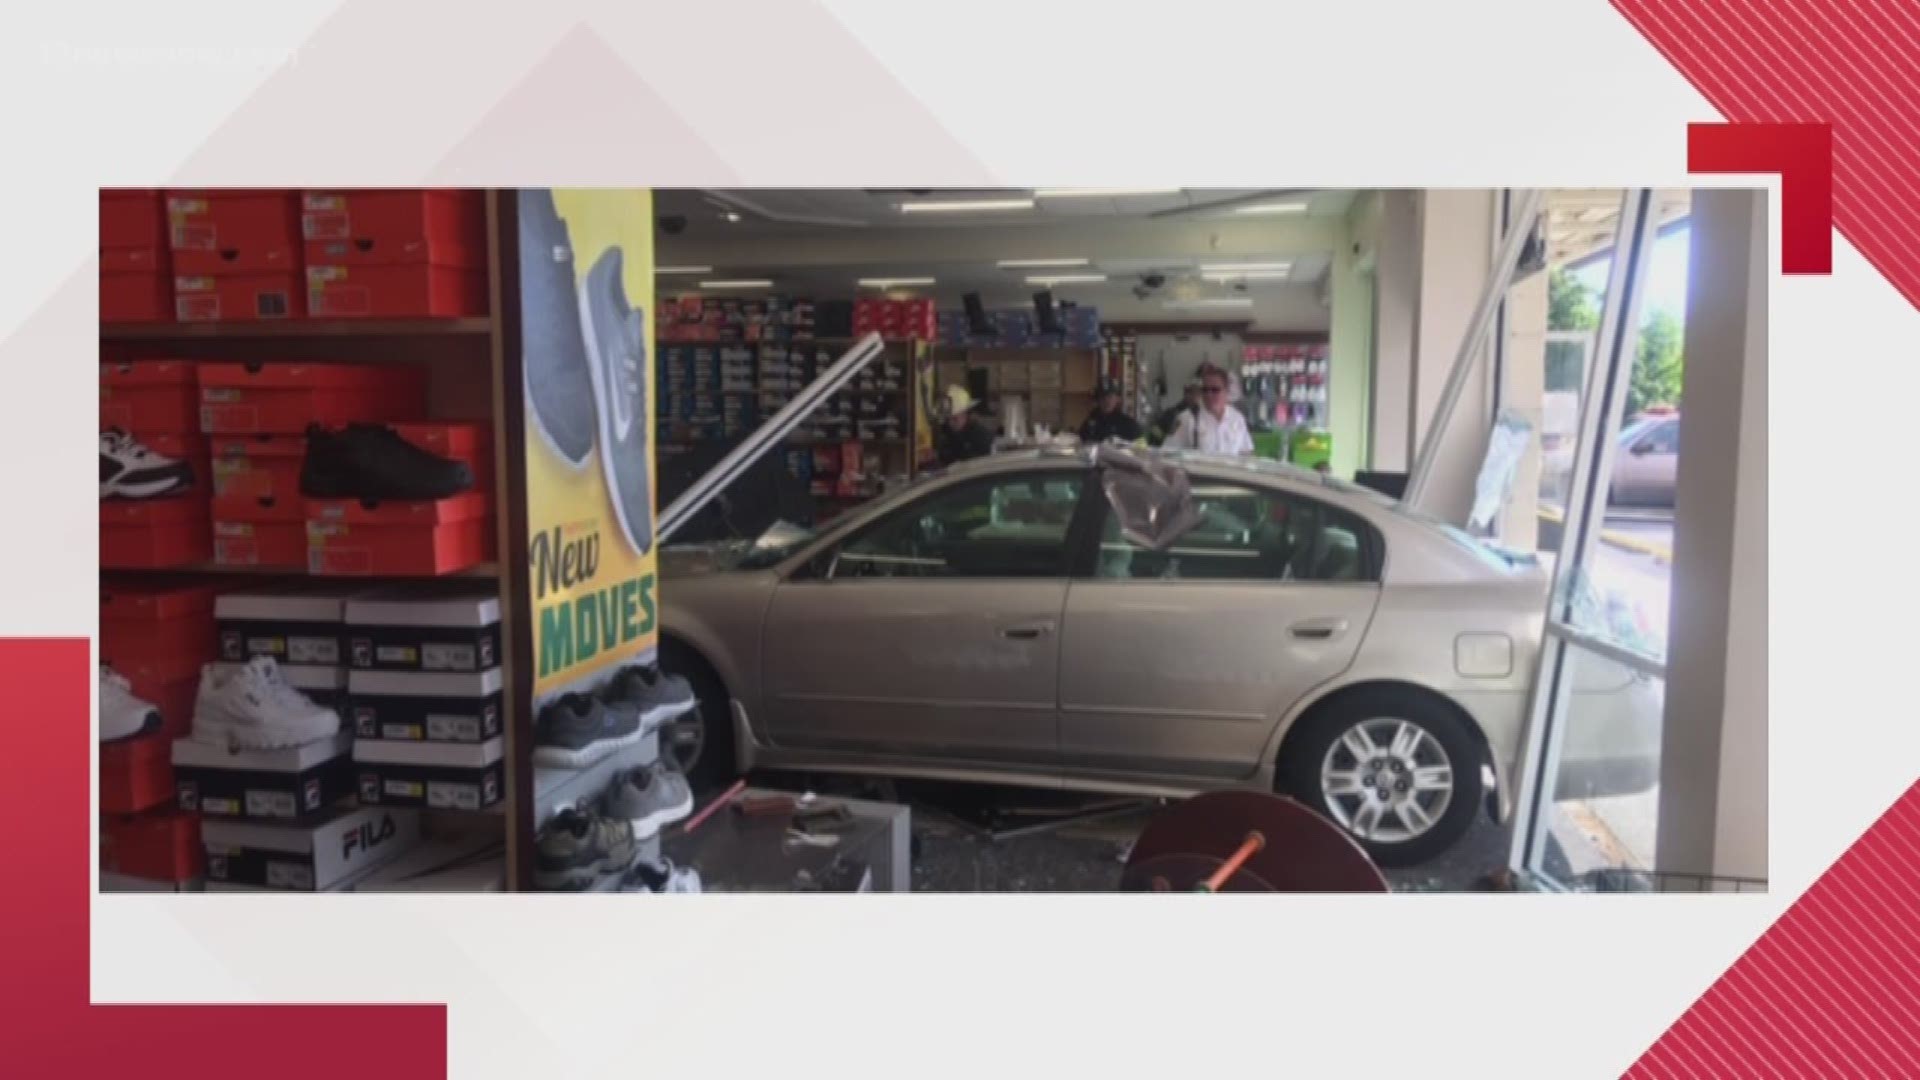 Suffolk police said a woman drove her car through the Shoe Dept. on North Main Street. The driver was not injured, but two store employees were injured.